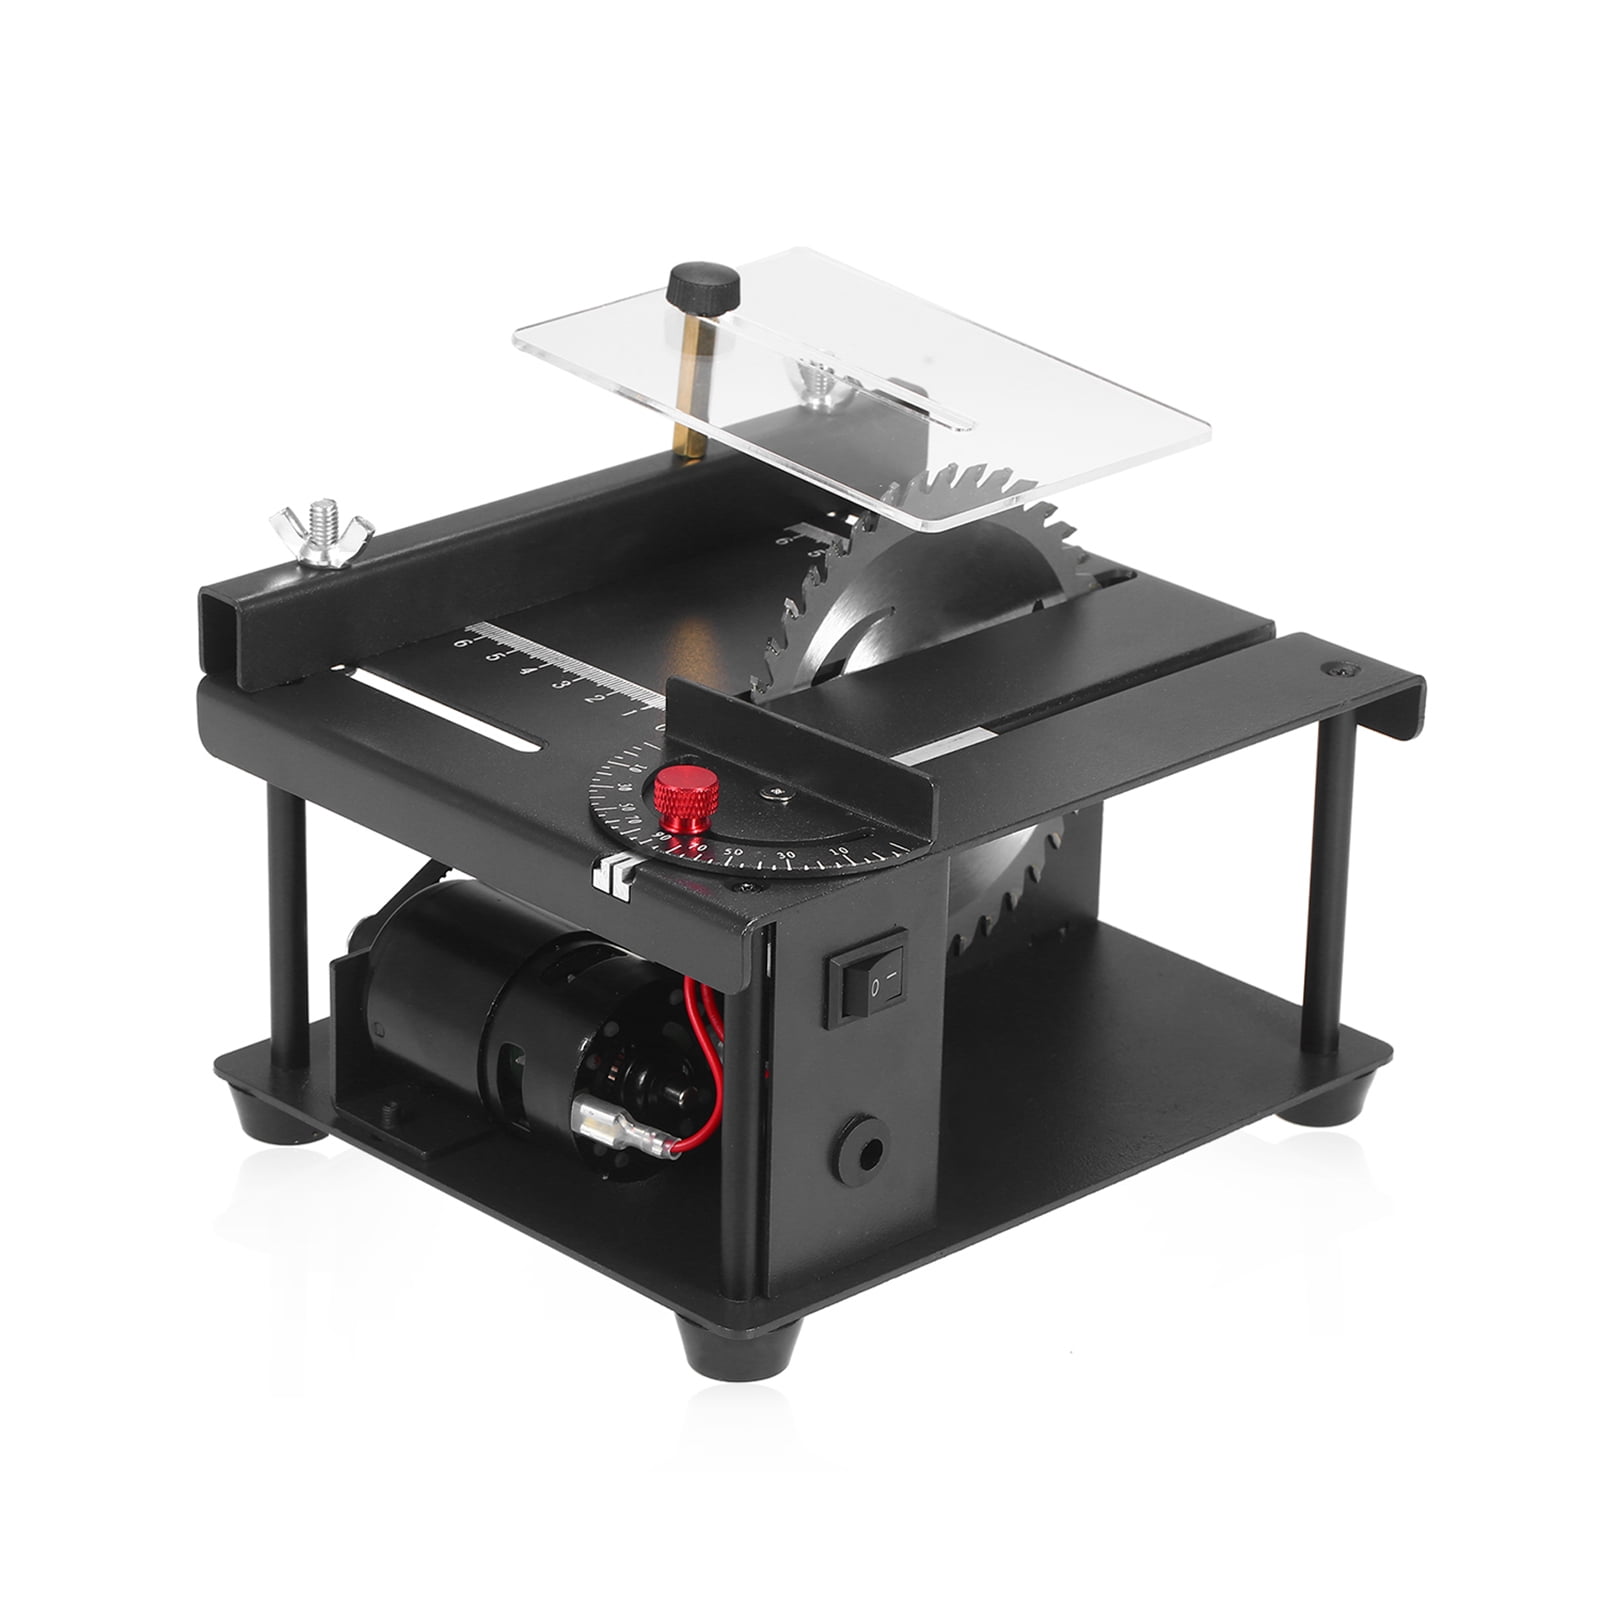 110-240V Multi-Functional Table Saw Mini Desktop Saw Cutter Electric Cutting  Machine With Adjustable-Speed 35Mm Cutting Depth For Wood Acrylic Cutting 